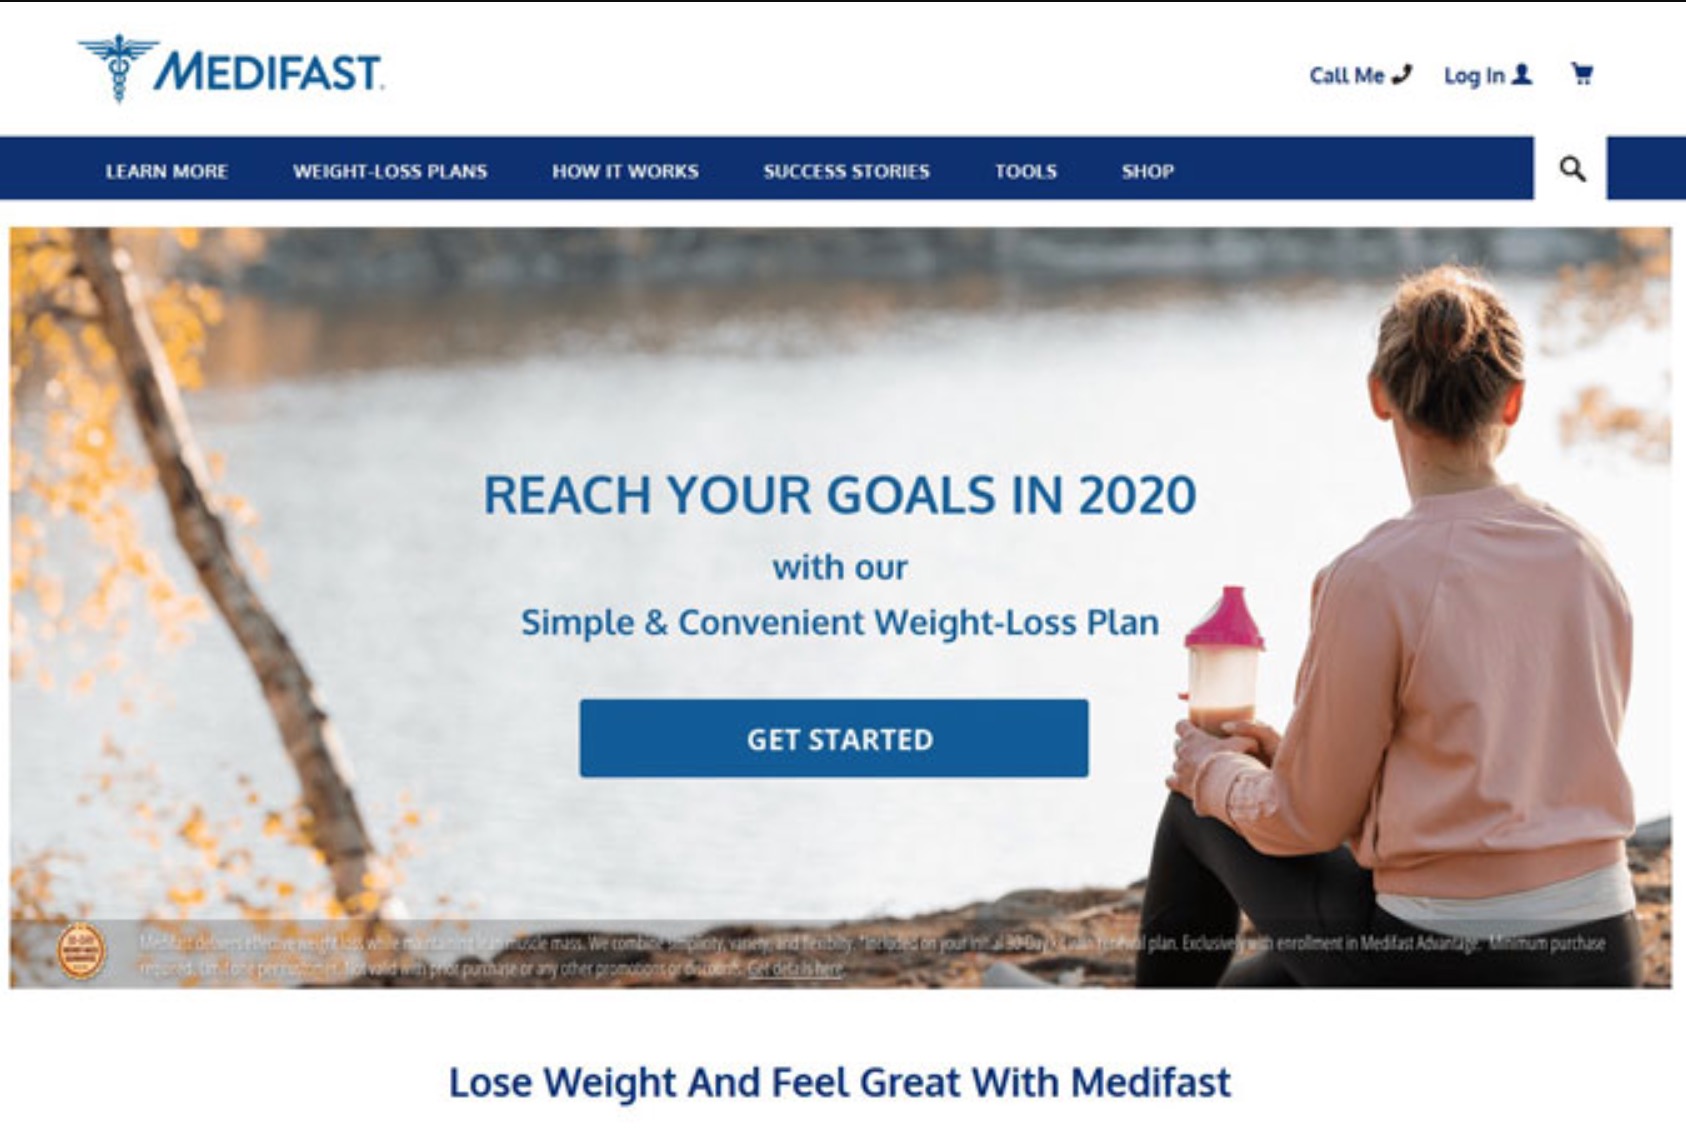 Medifast page